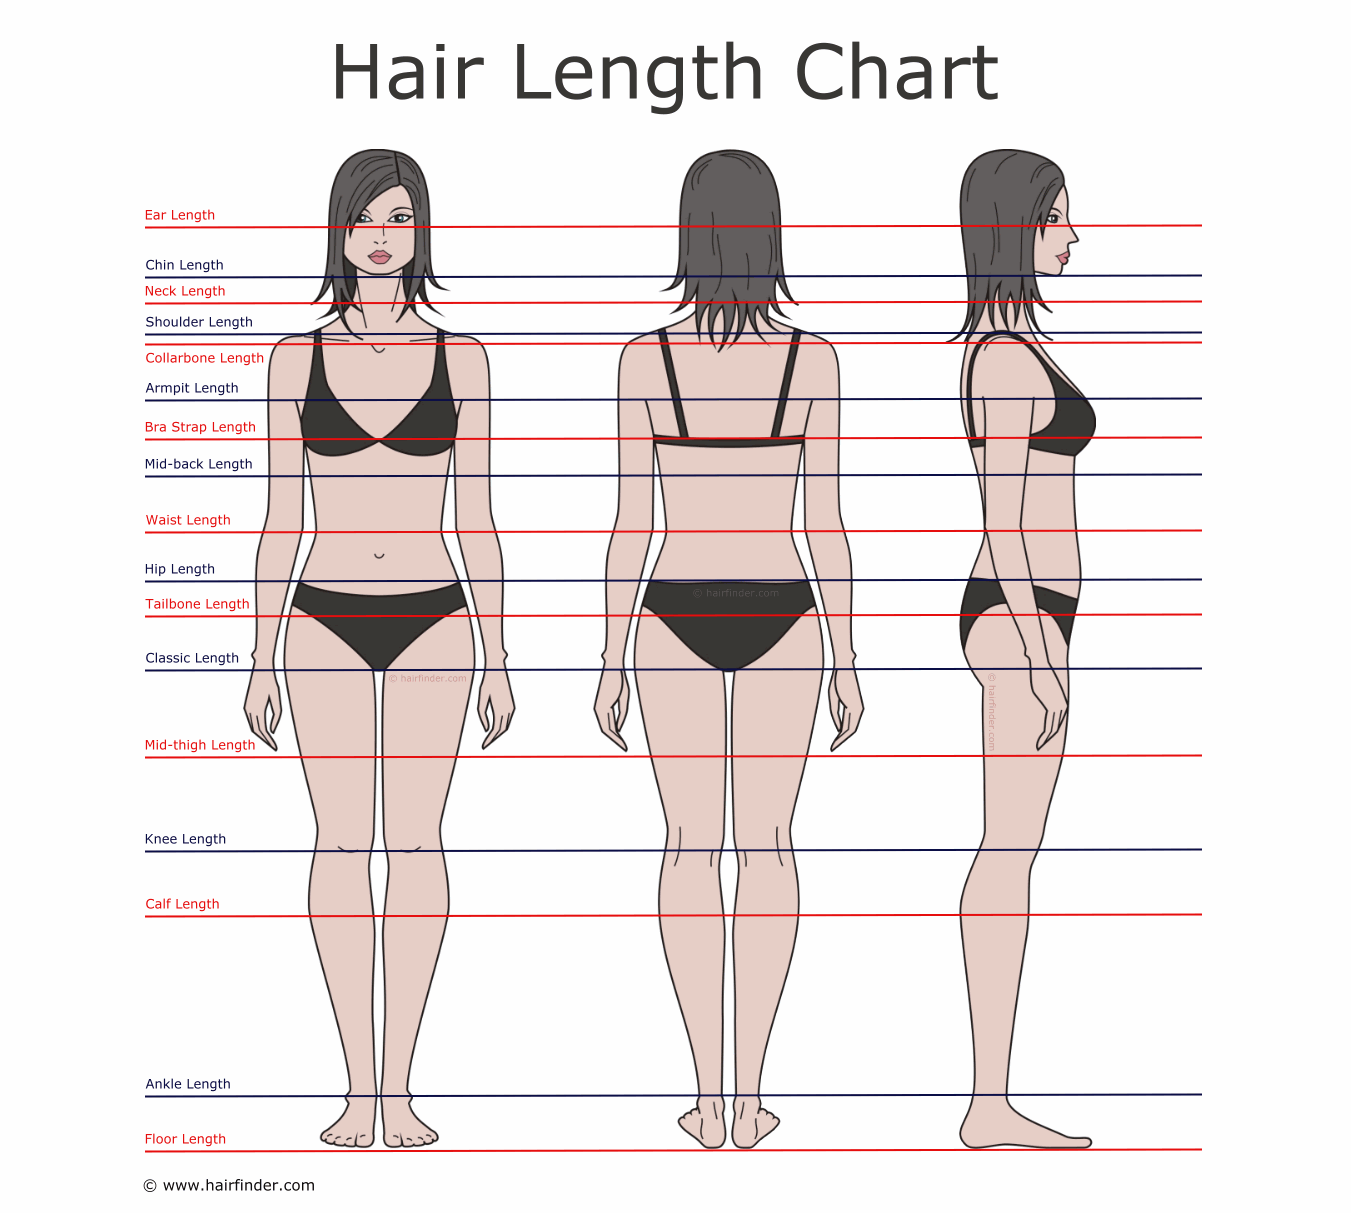 Descriptions of hair lengths and growing times